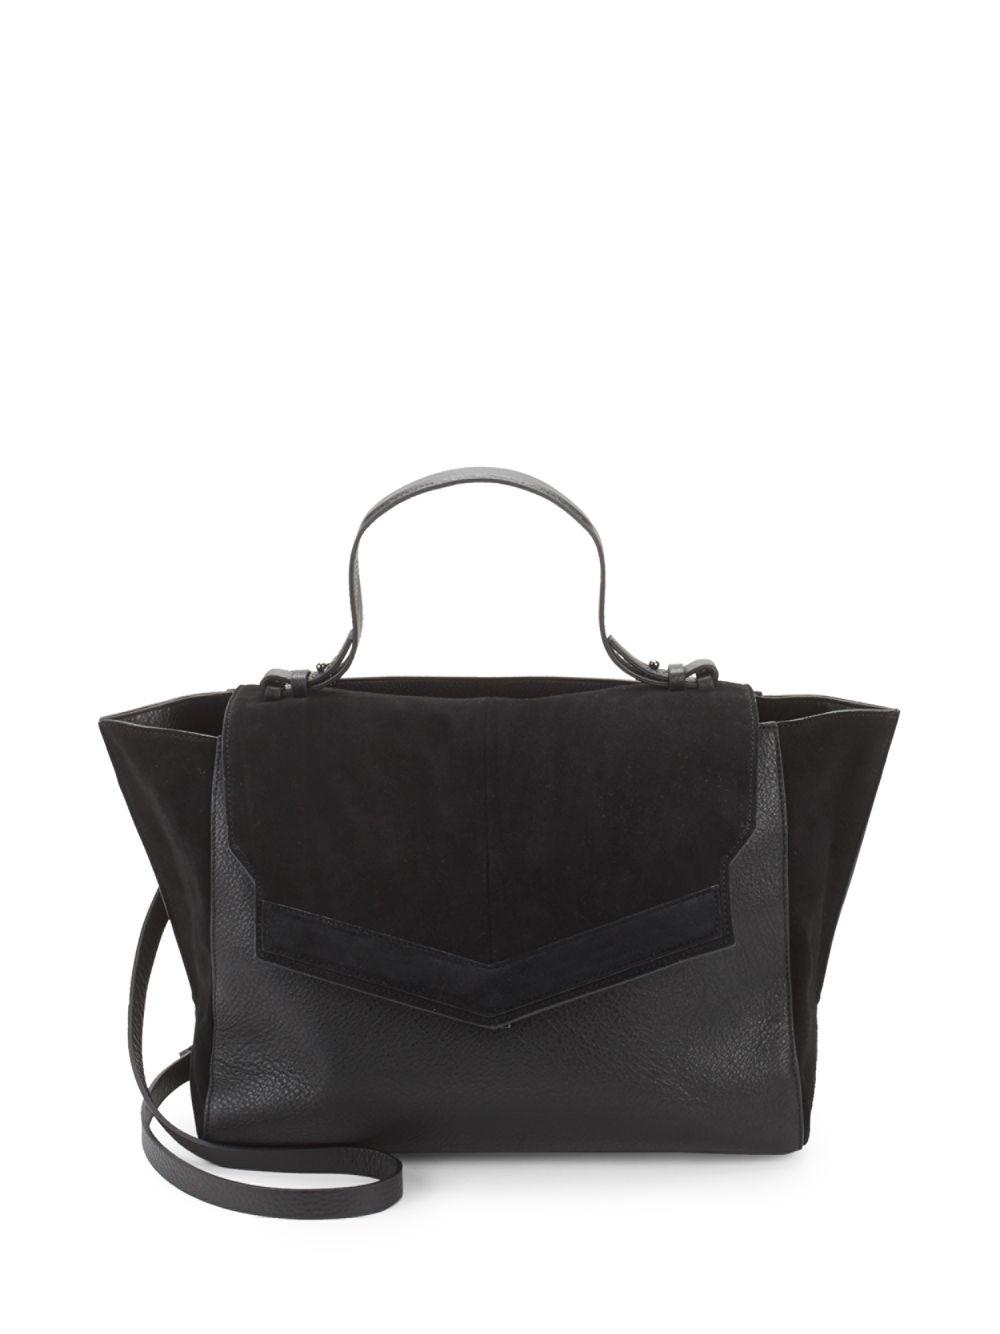 Halston Suede & Leather Tote Bag in Black - Lyst